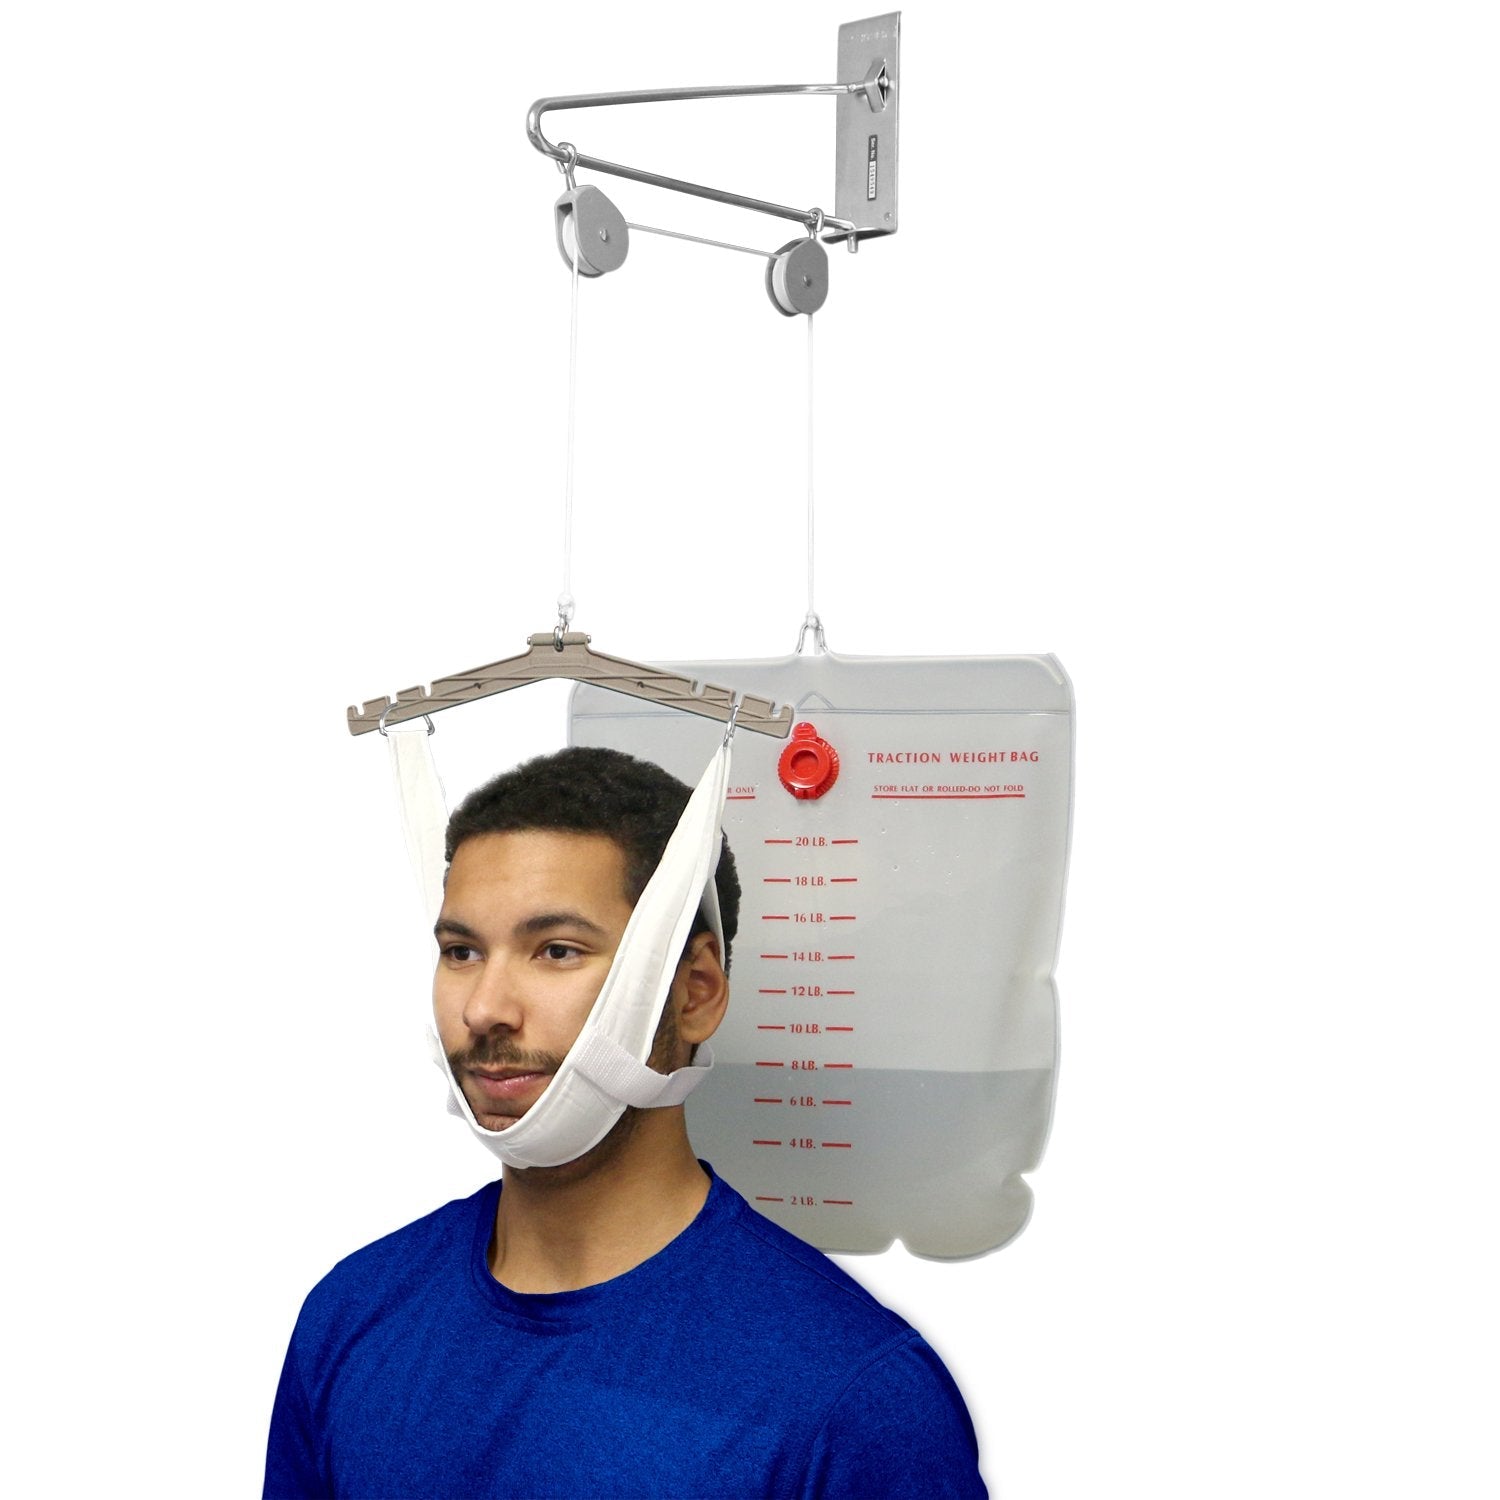 AIR 2501 EA/1 OVER-THE-DOOR CERVICAL TRACTION KIT UNIVERSAL